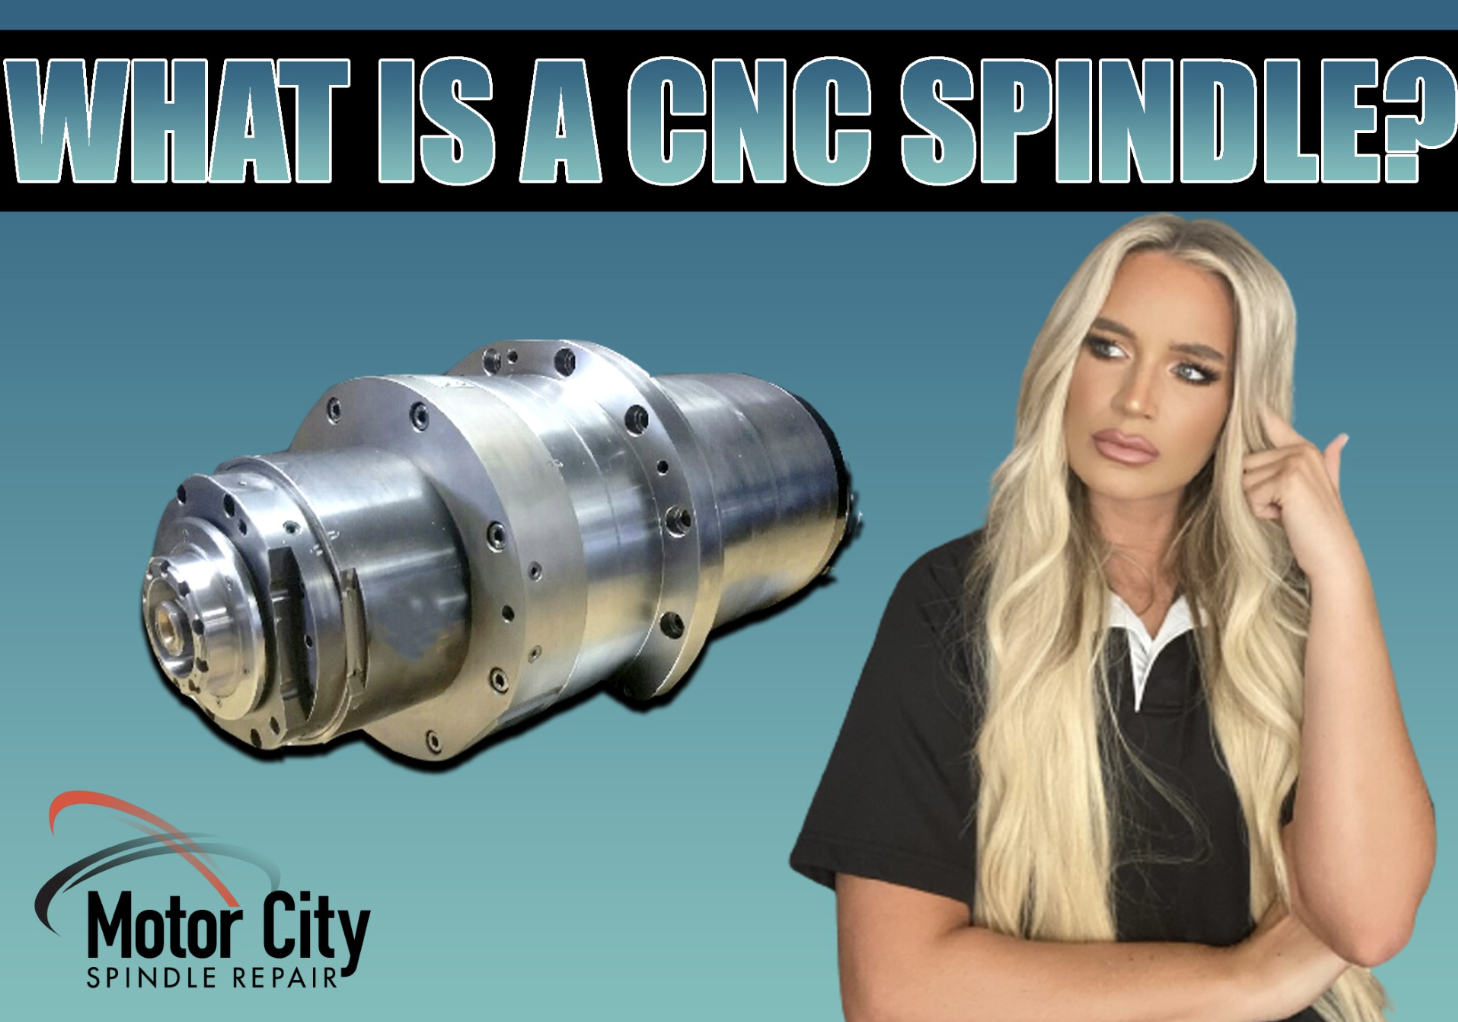 Main Spindle in CNC Machines